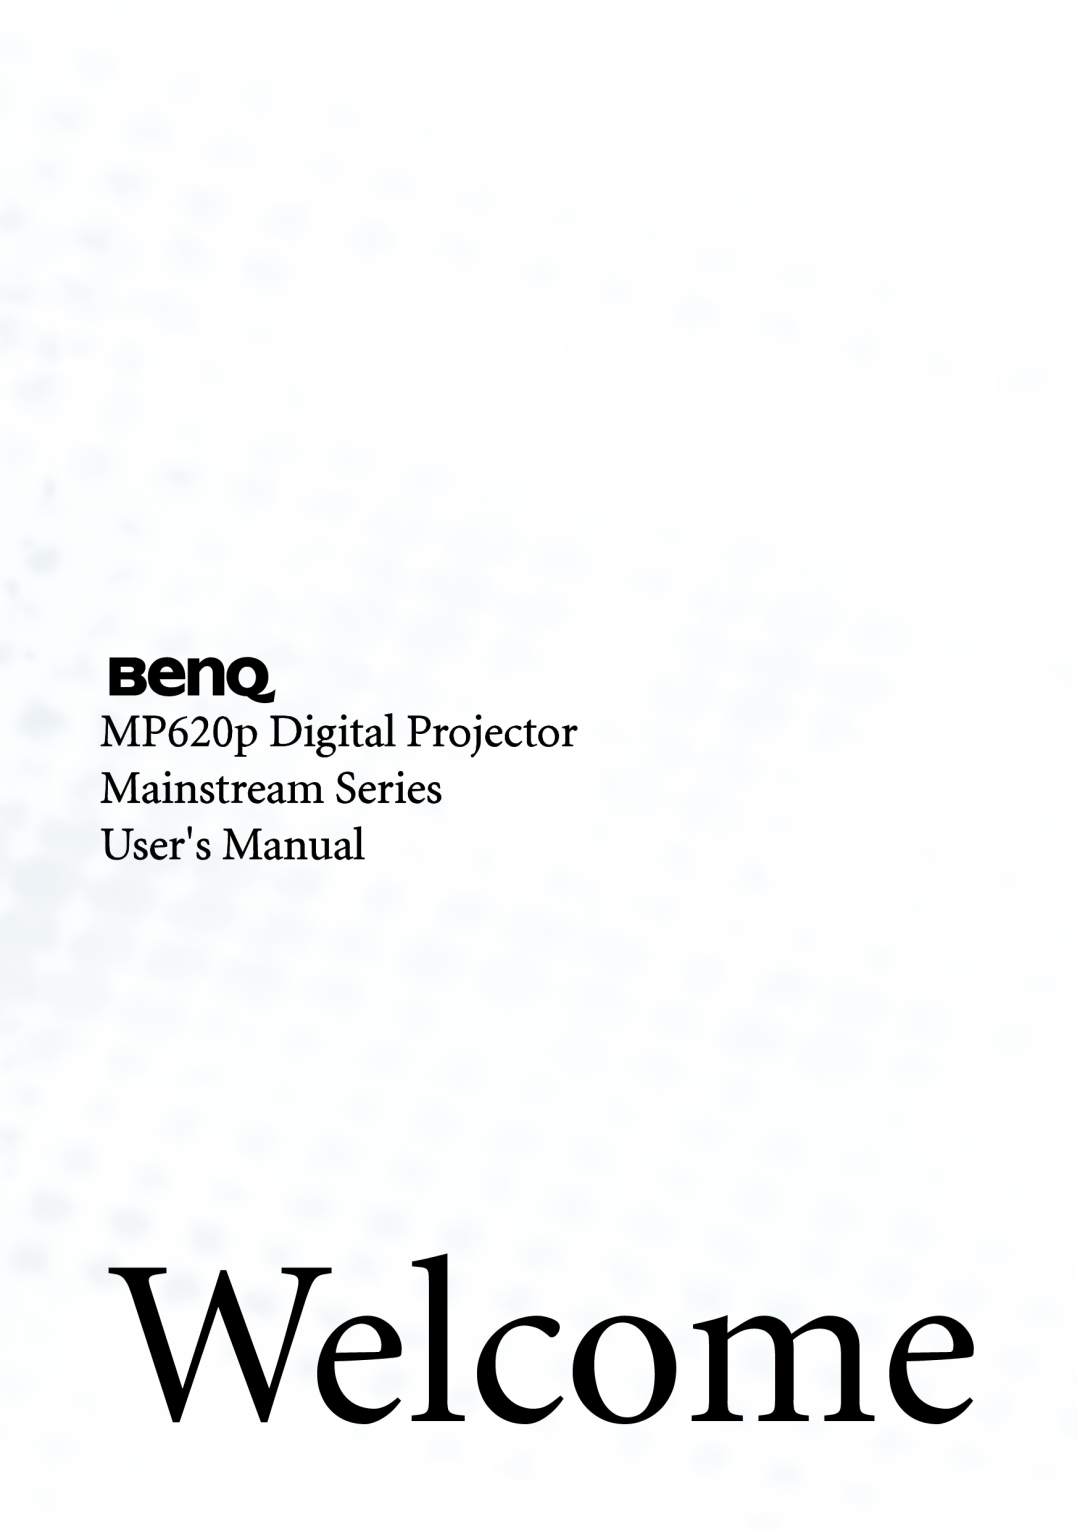 BenQ user manual Welcome, MP620p Digital Projector Mainstream Series Users Manual 